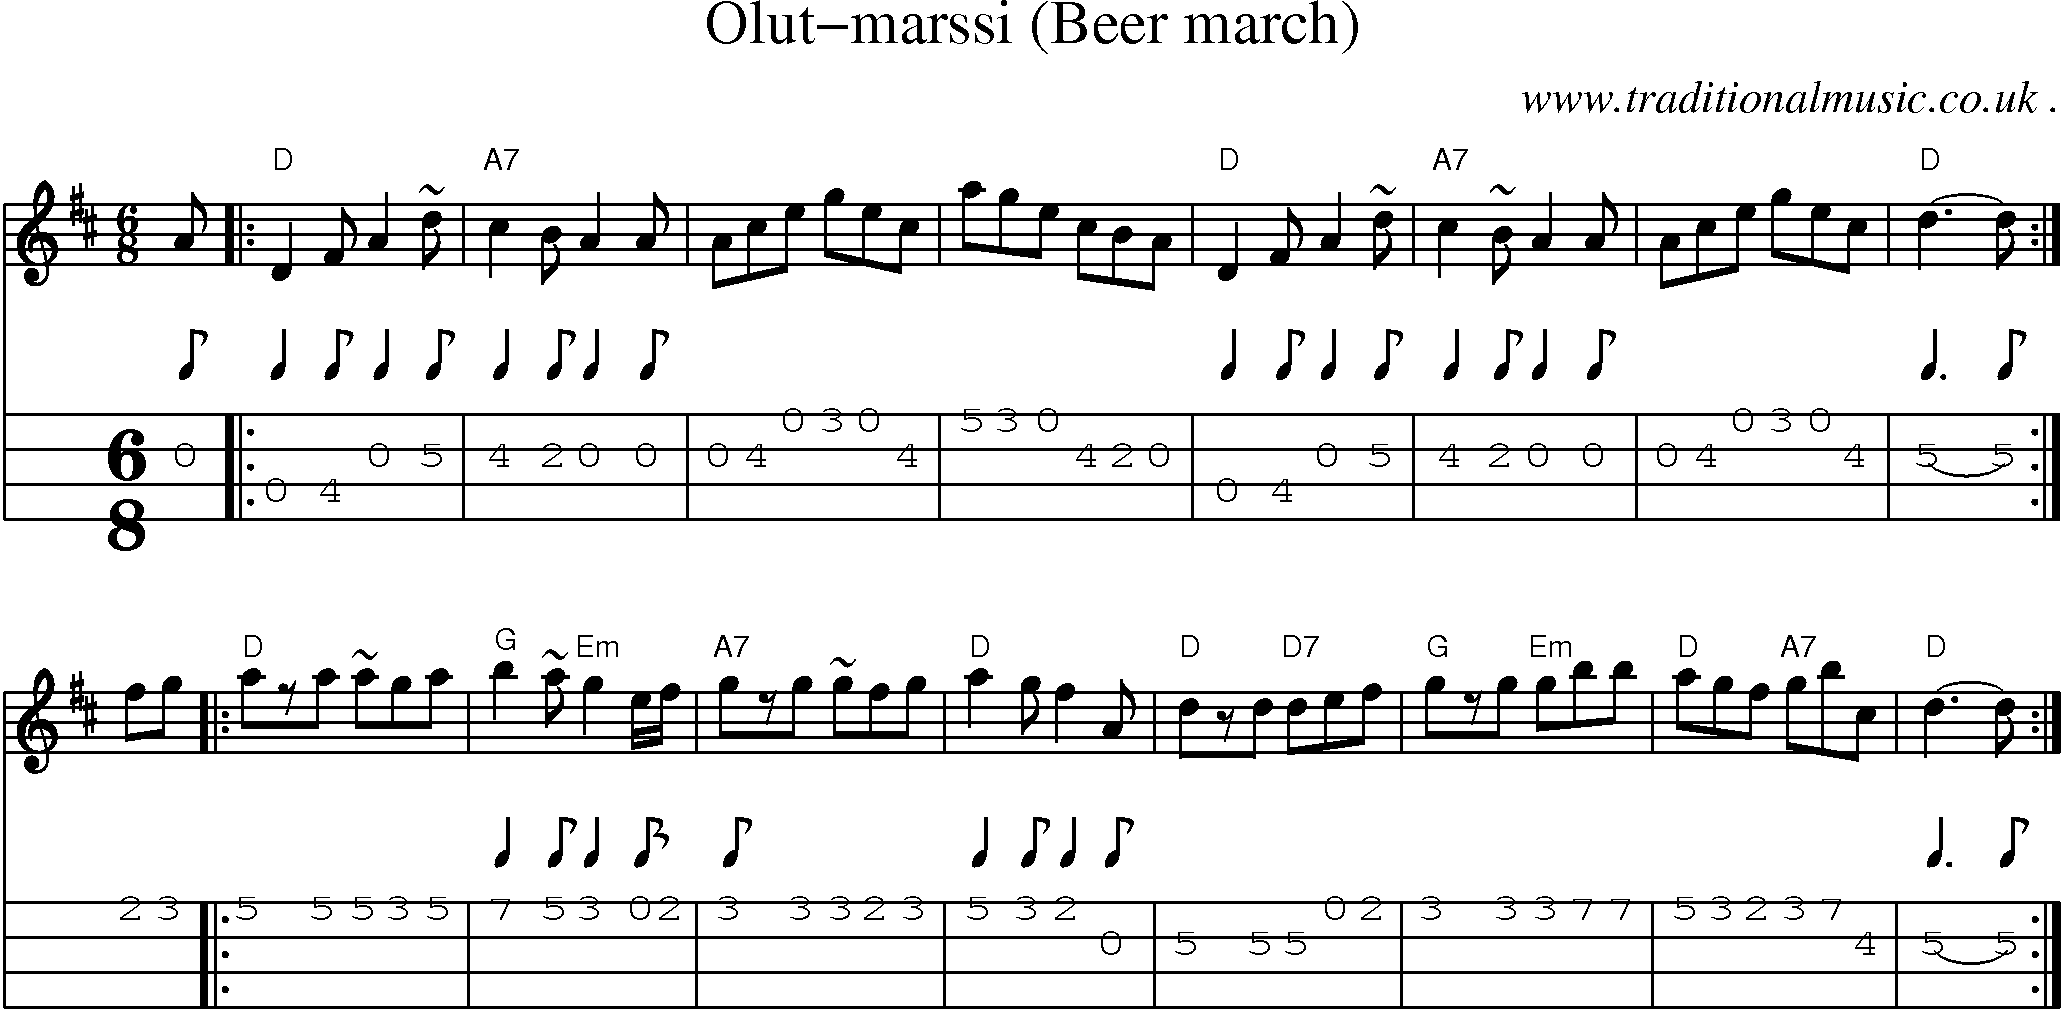 Sheet-music  score, Chords and Mandolin Tabs for Olut-marssi Beer March